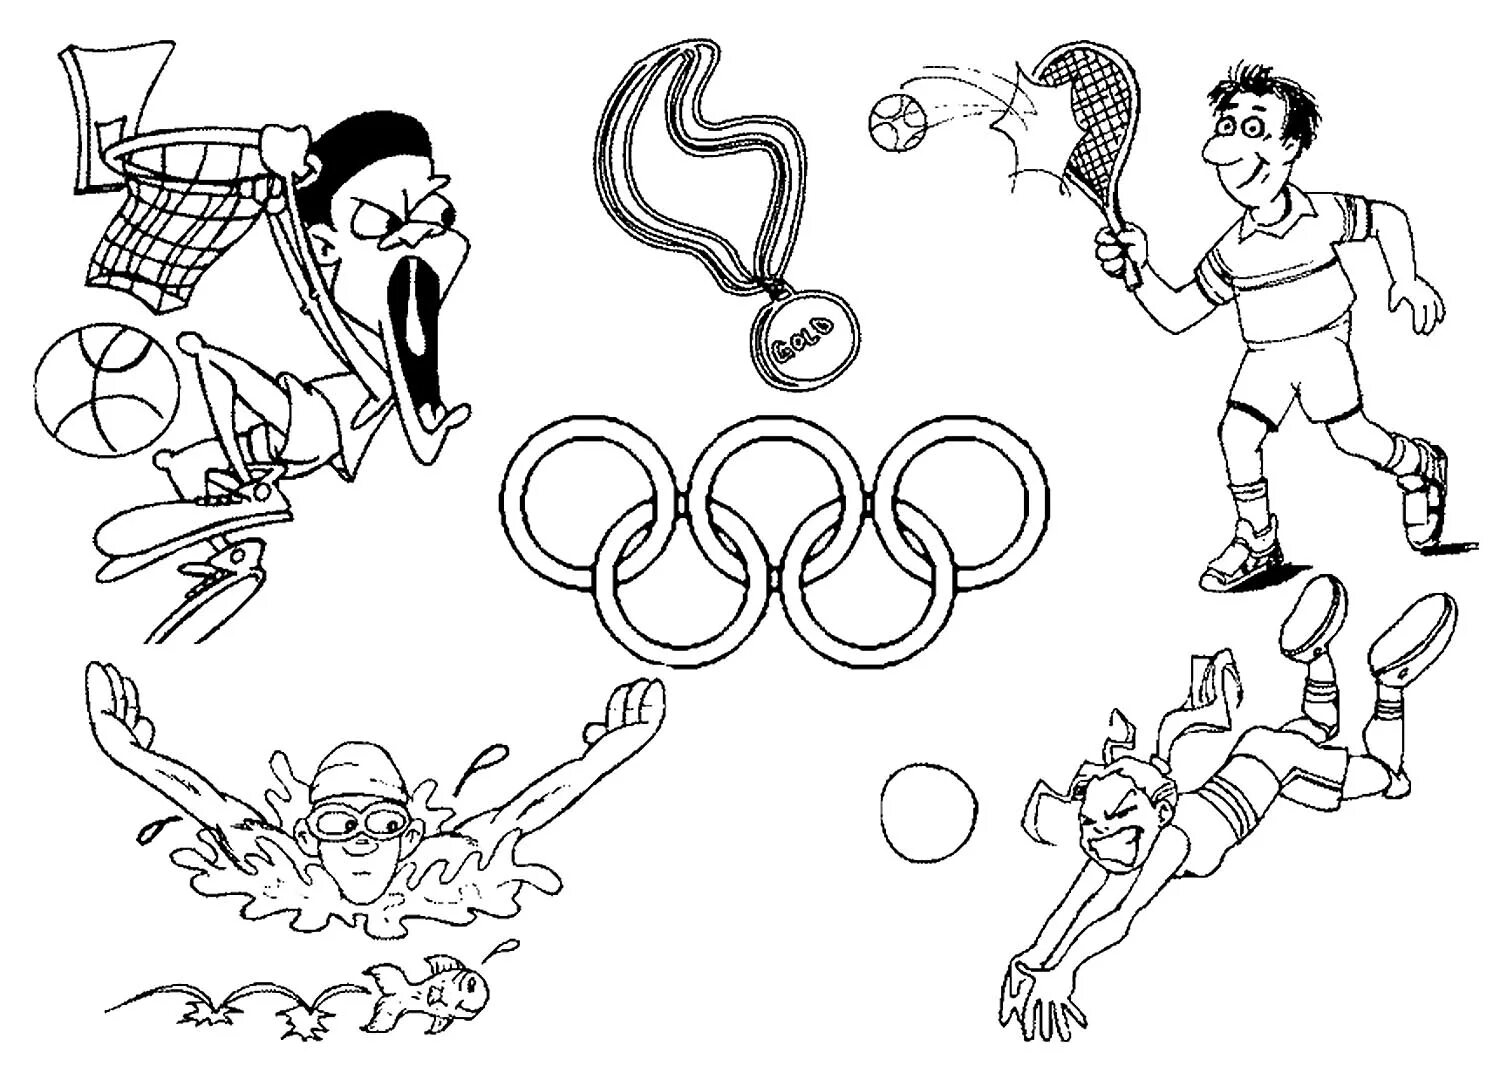 Unique olympic games coloring book for kids